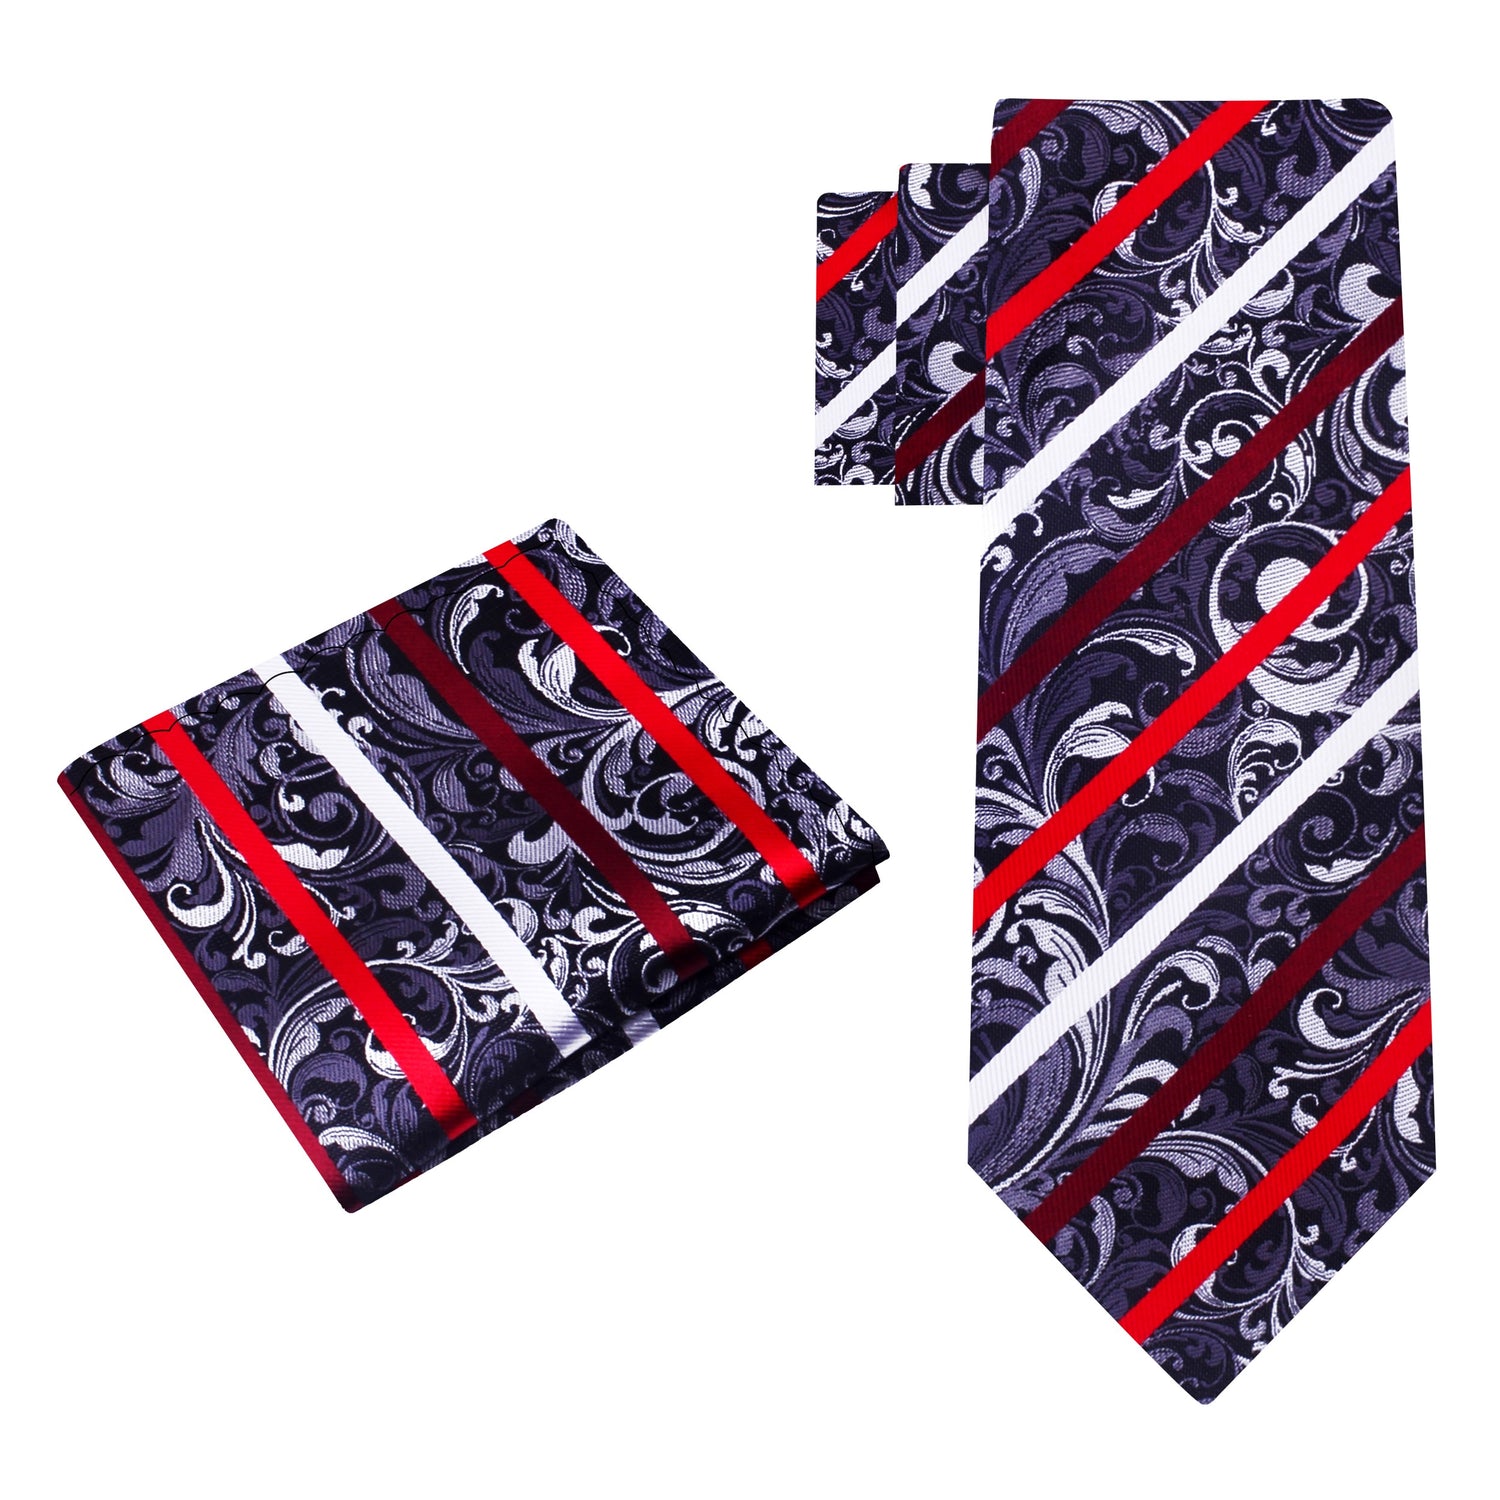 Alt View: Grey, Black, White and Red Floral with Stripe Tie and Pocket Square